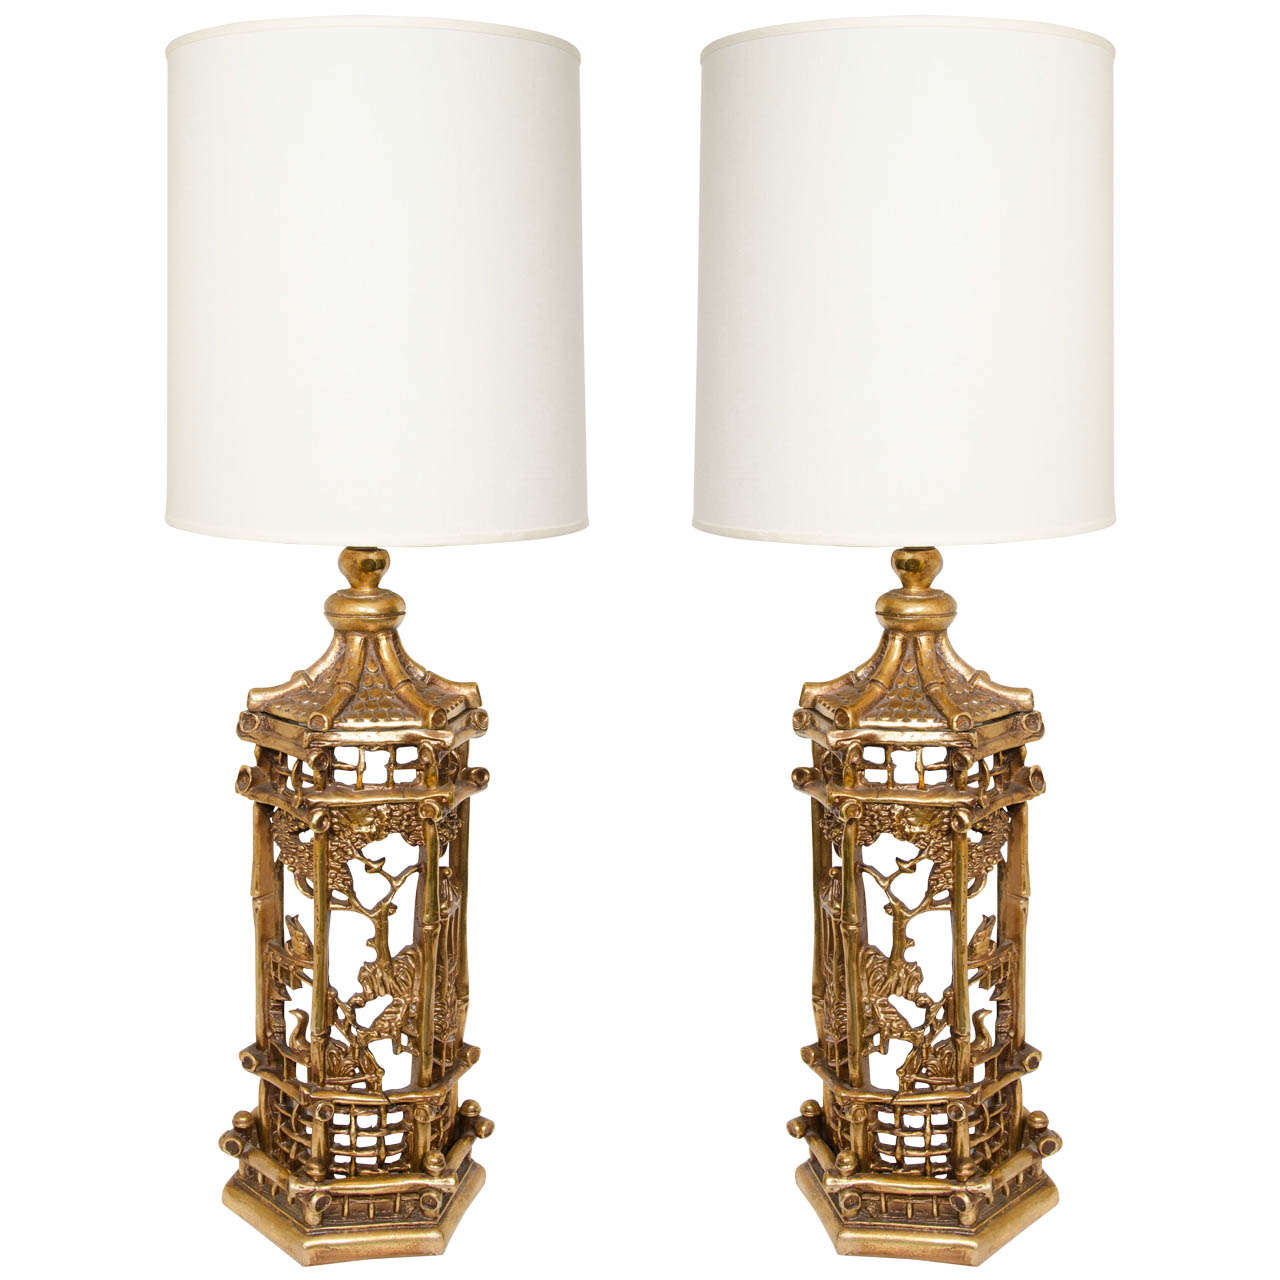 Pair of Exceptional Gilt Chinoiserie Lamps in the Manner of James Mont